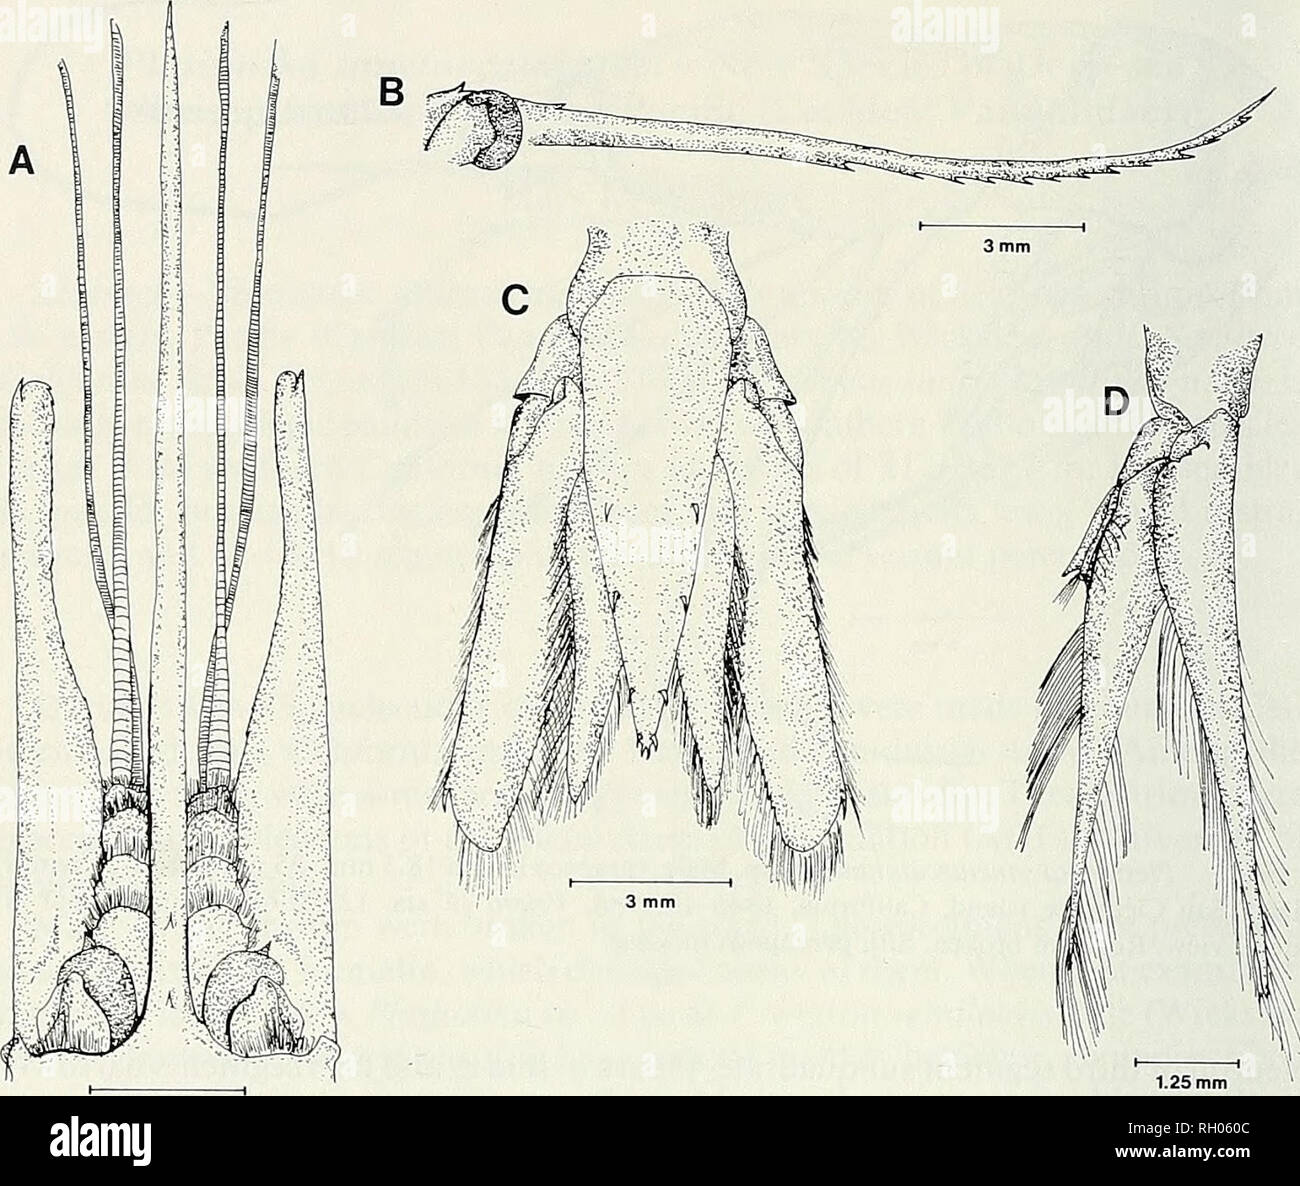 . Bulletin. Science; Natural history; Natural history. 140 SOUTHERN CALIFORNIA ACADEMY OF SCIENCES. Fig. 2. Plesionika sanctaecatalinae. Male, carapace length 14.6 mm, 19.25 miles from Pyramid Head, San Clemente Island, 1680-1865 m, Velero /I'sta. 11703-67. A, rostrum and frontal region in dorsal view; B, rostrum in lateral view; C, tail fan; D, second pleopod. First pereopod as long as third maxilliped, minutely chelate. Propodus about equal in length to dactyl, carpus 2.5X length of propodus, merus 2X length of propodus, ischium about 0.3X length of merus, all segments with scattered long se Stock Photo